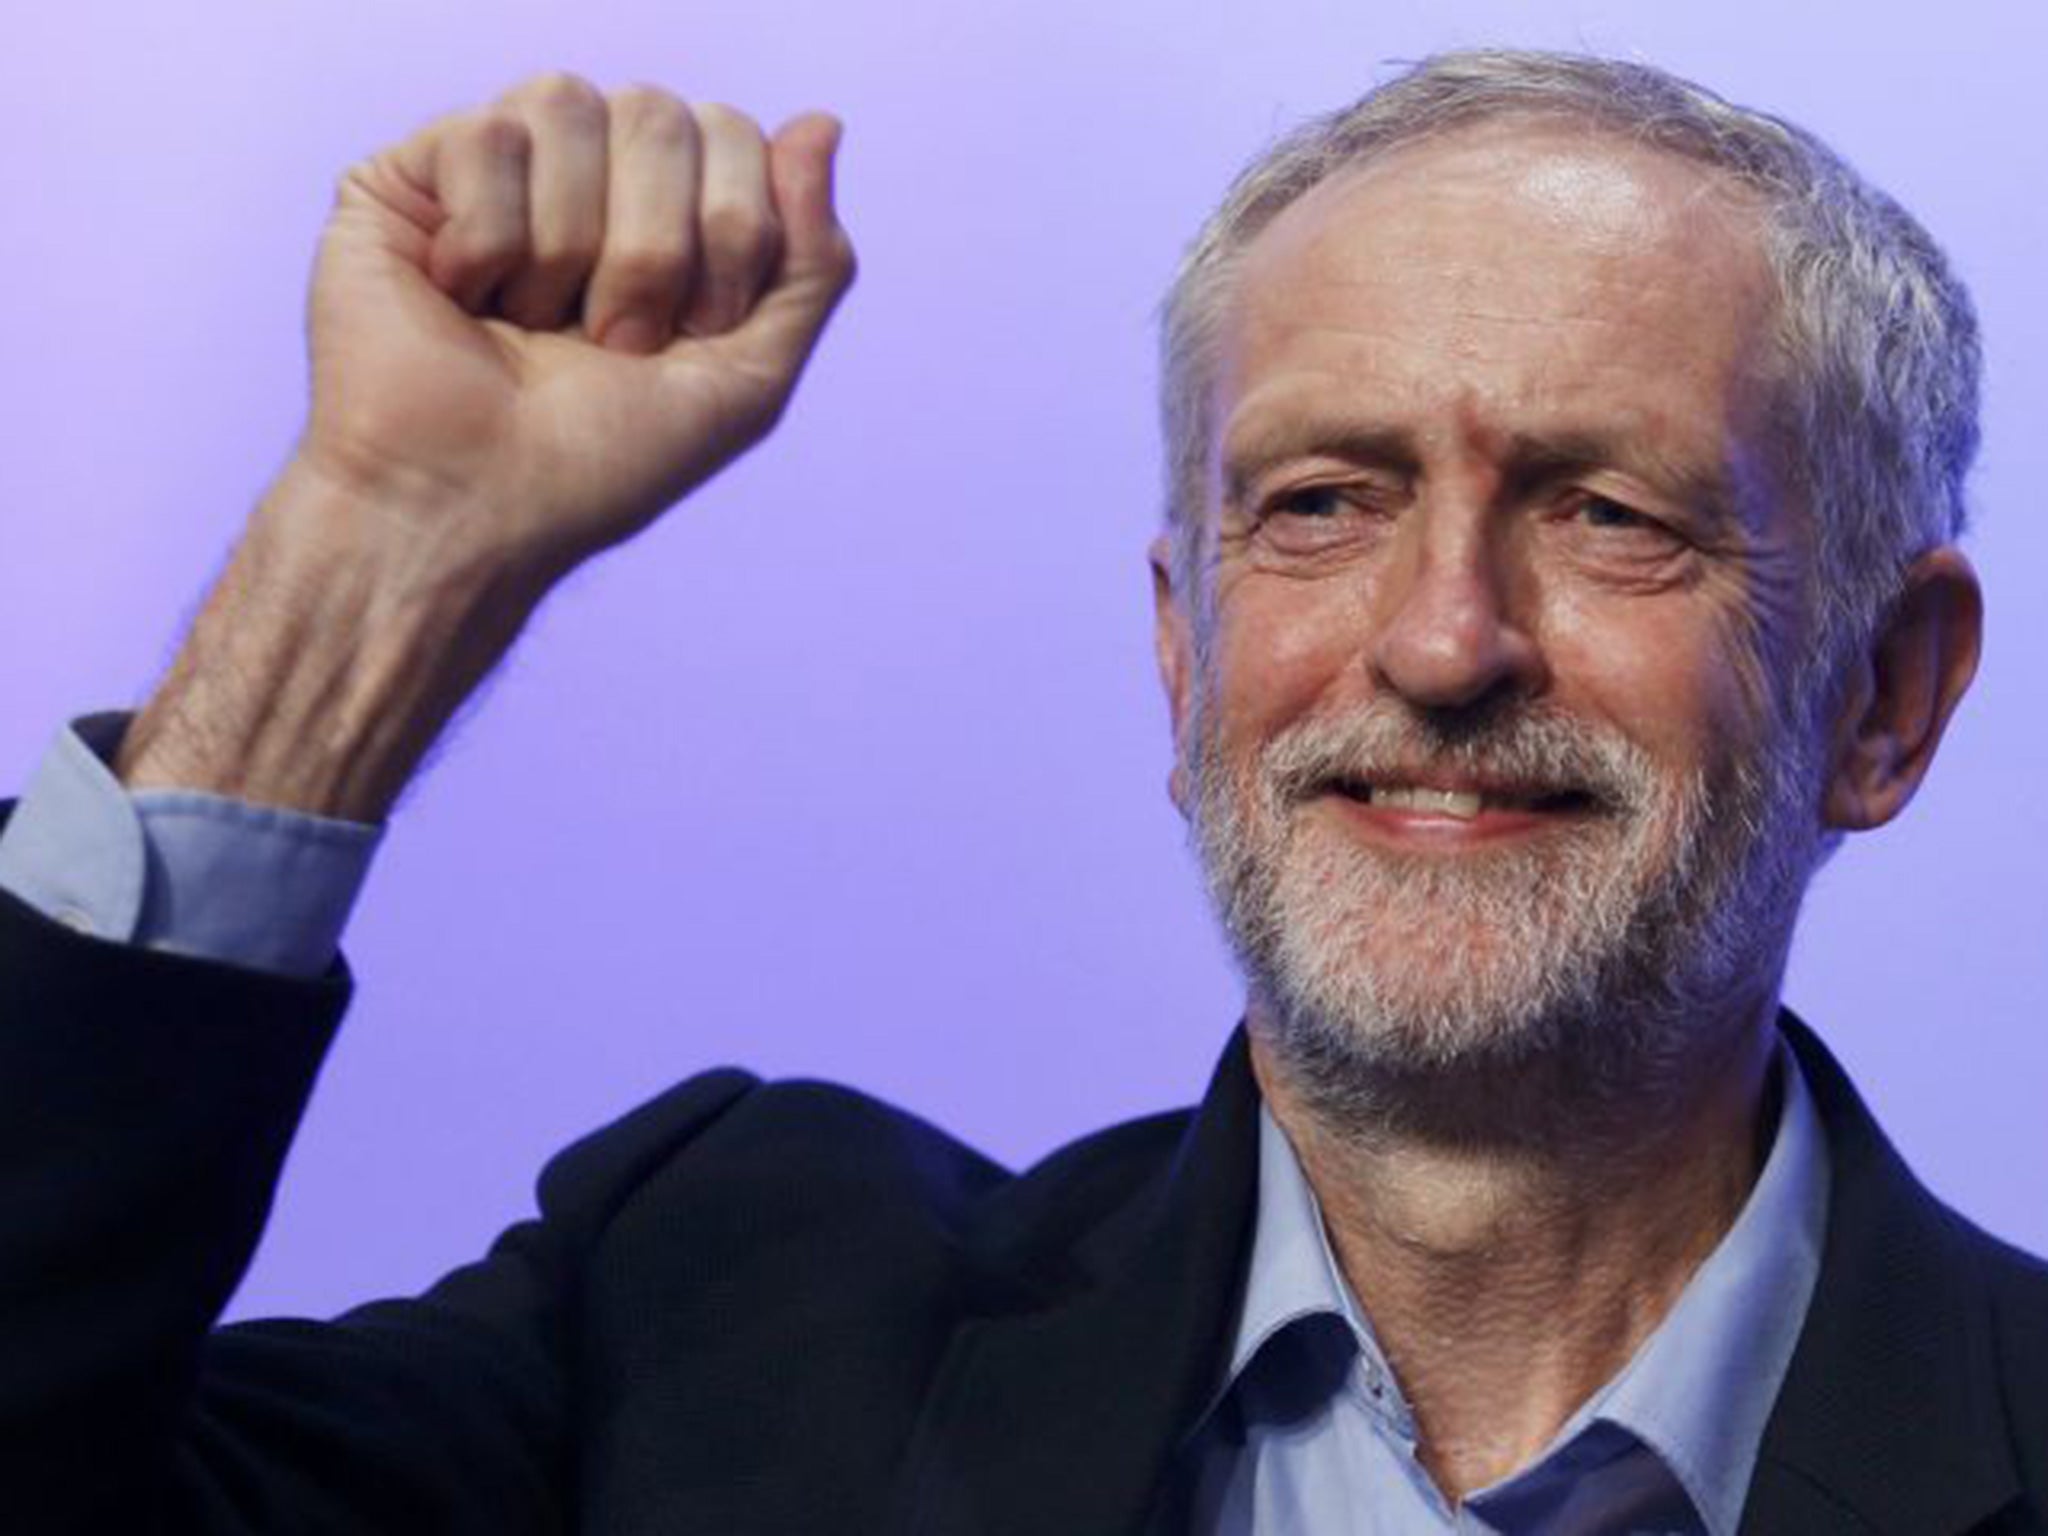 The leader of the Labour Party Jeremy Corbyn